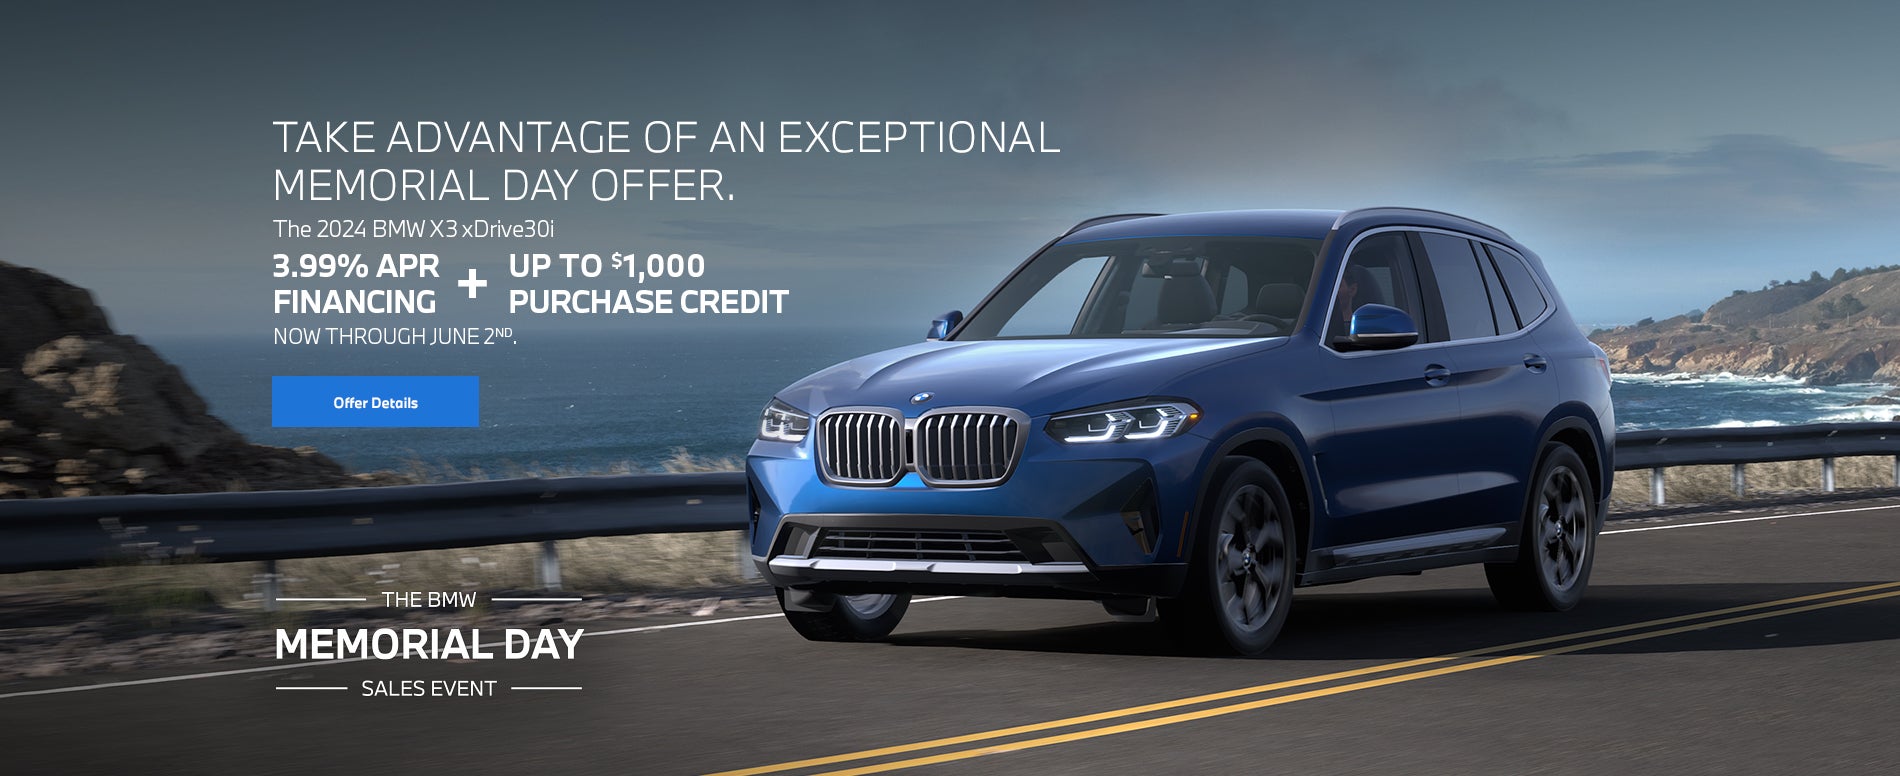 2024 X3 3.99% APR + up to $1000 purchase credit 